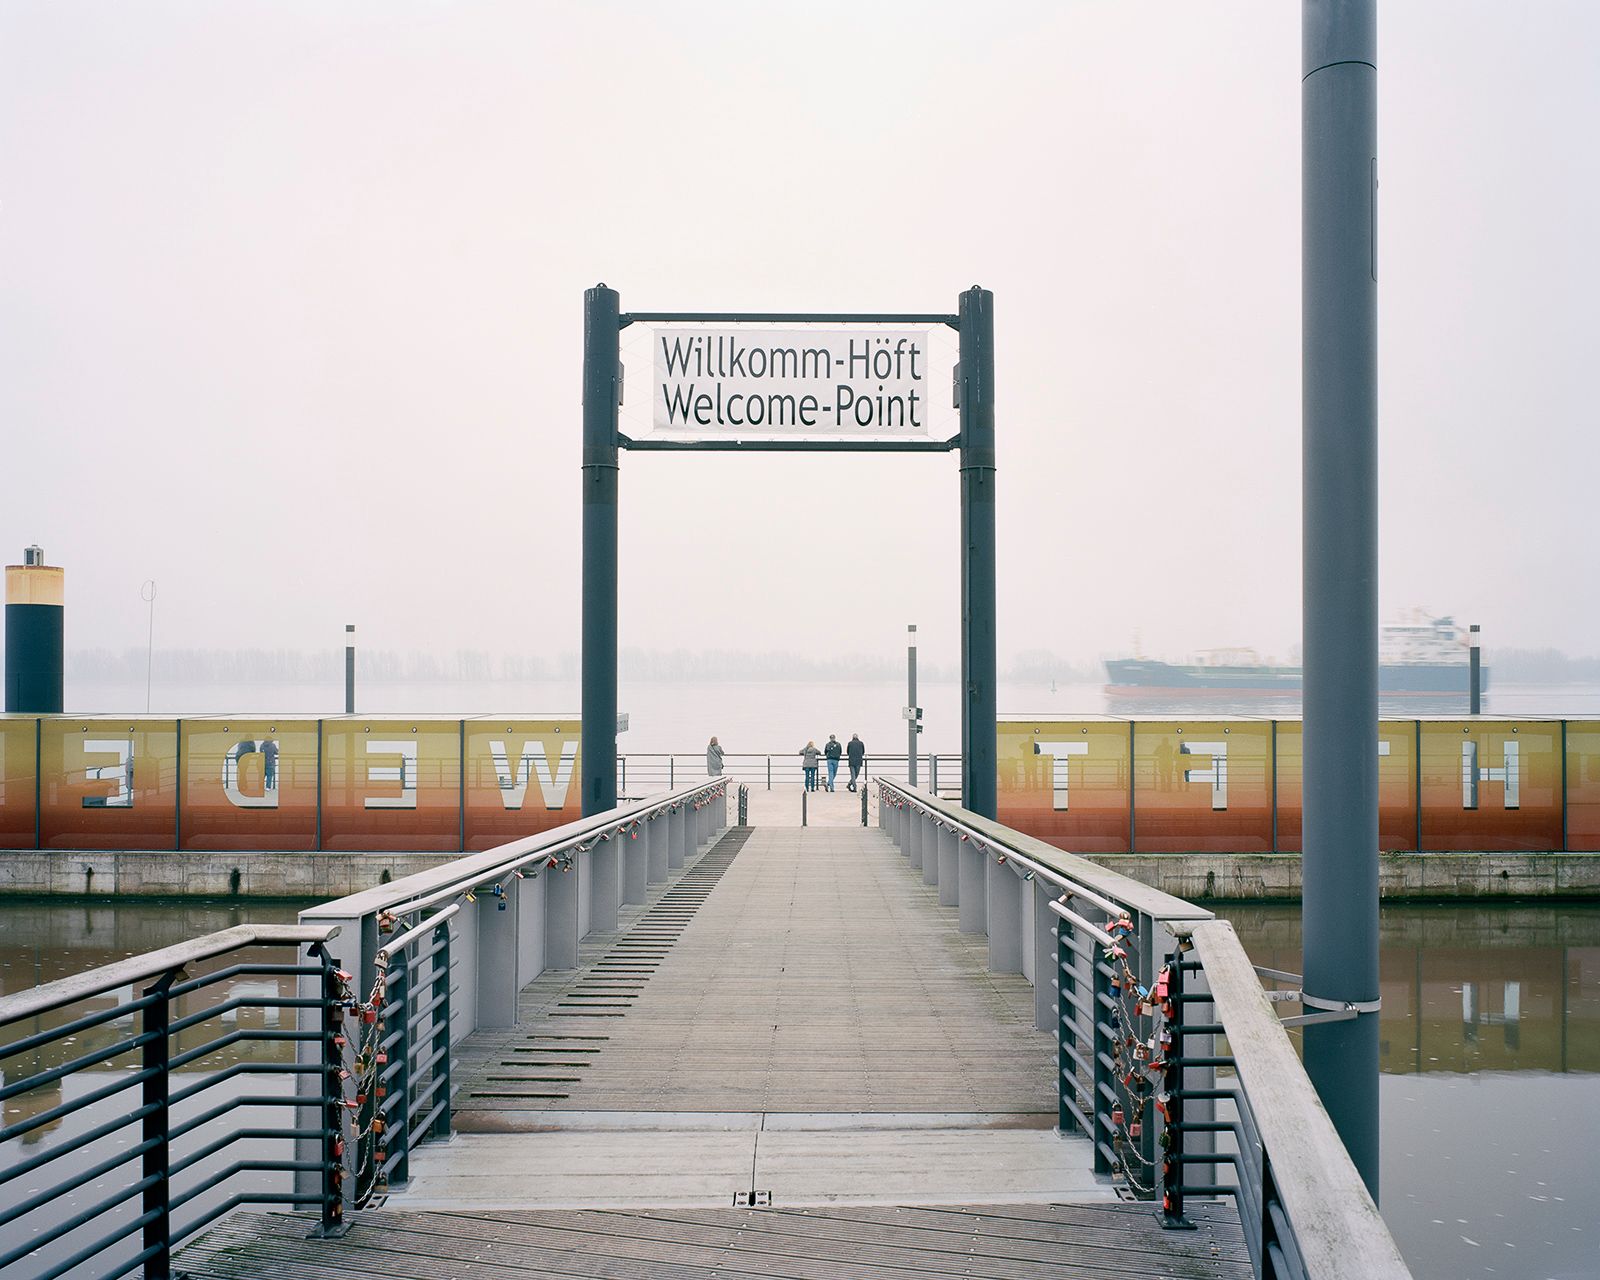 © Pietro Viti - The Welcome Point in Wedel, at the entrance of the port of Hamburg. (Hamburg, 2017)